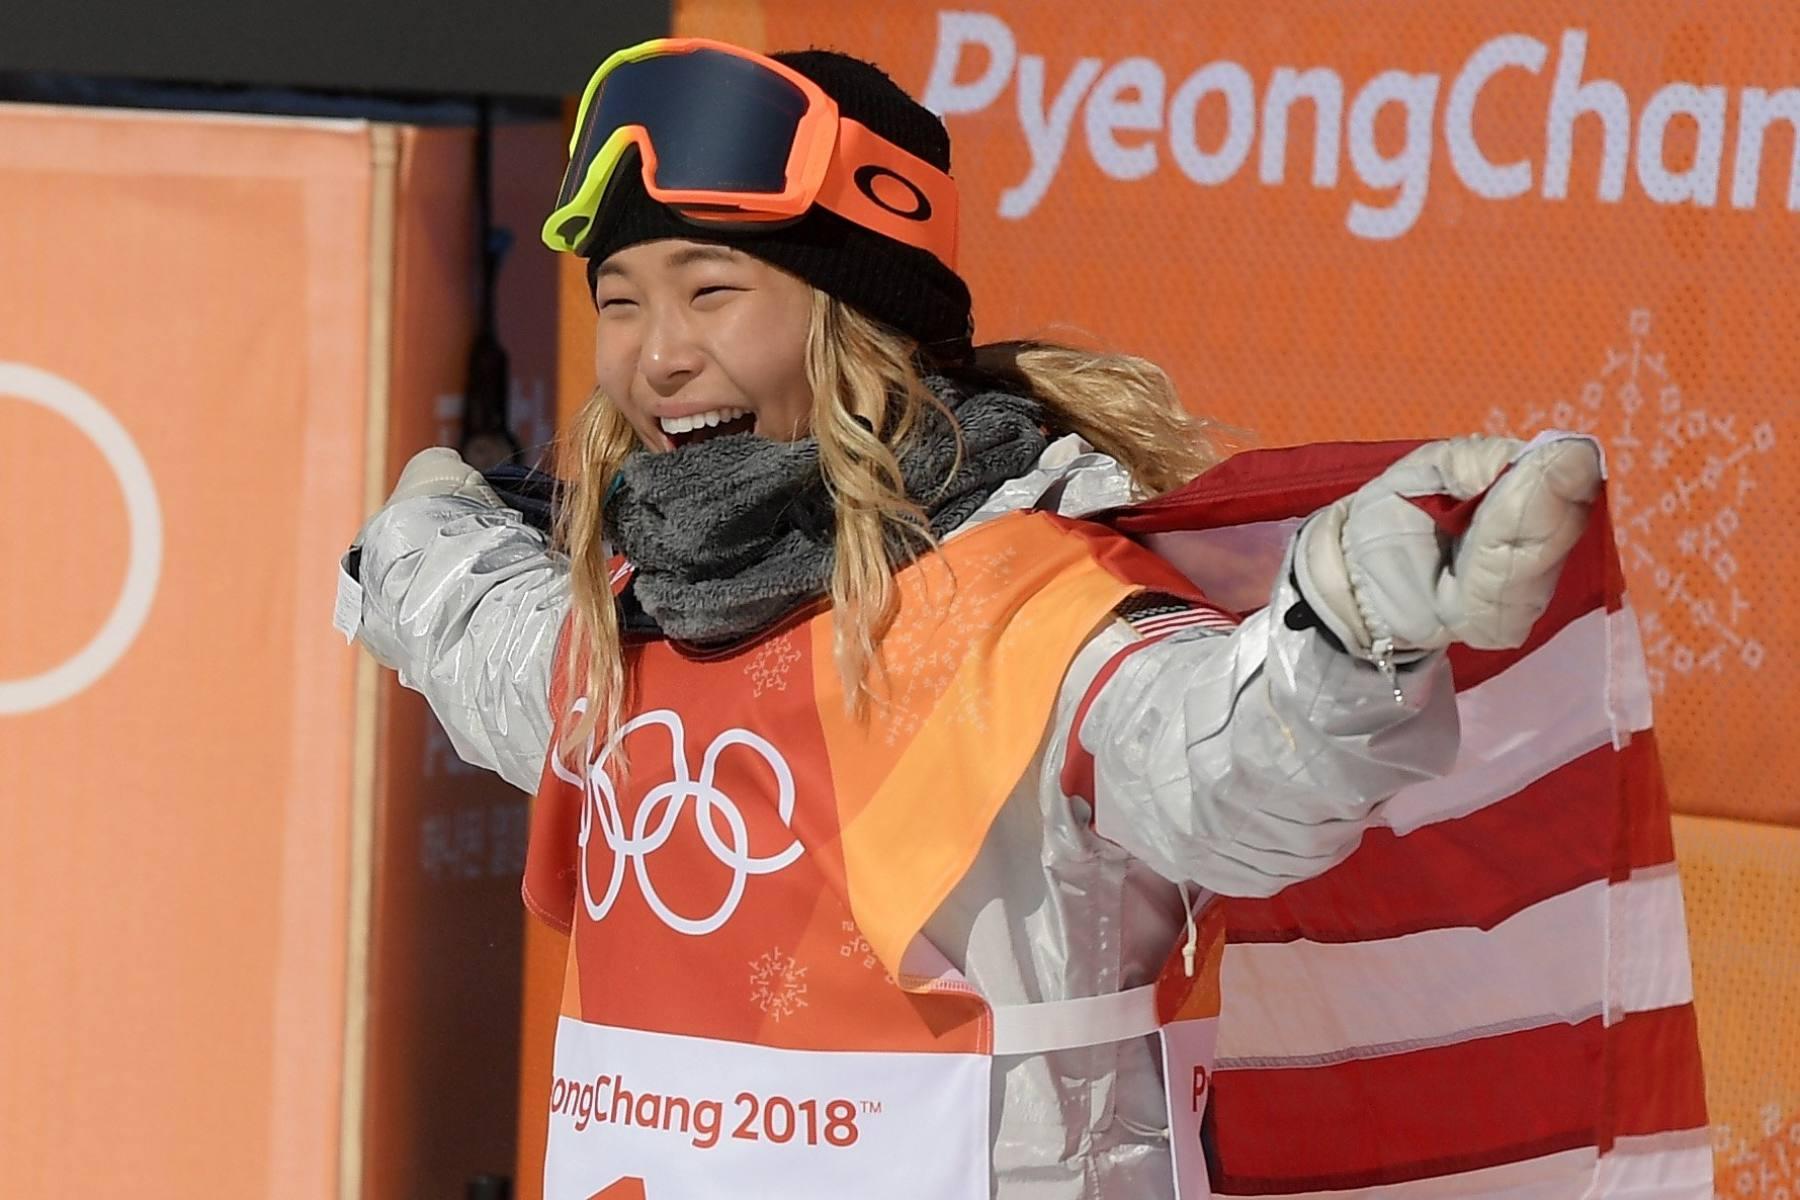 The Best Moments From The Winter Olympics 2018 So Far